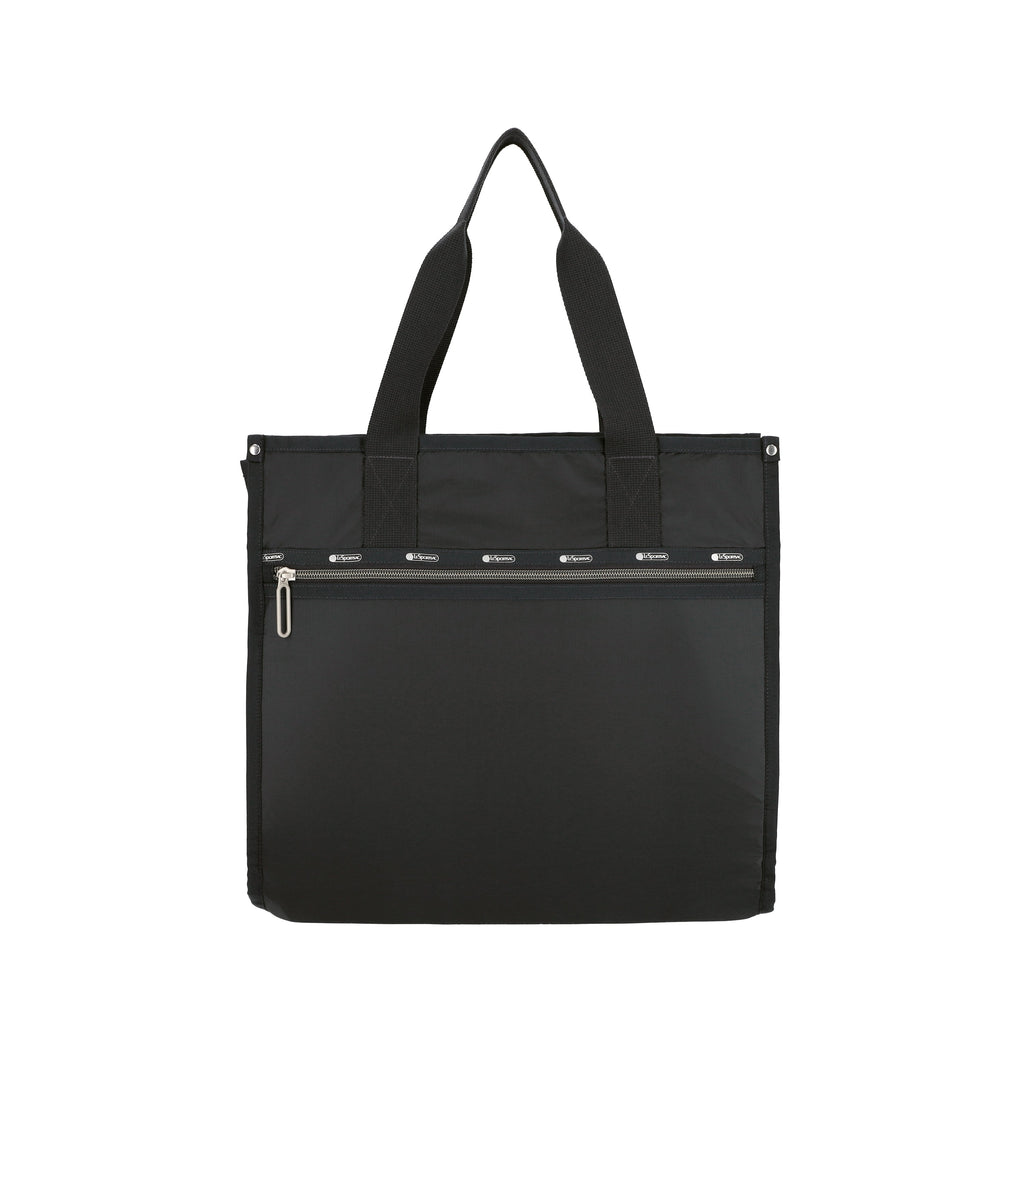 Soft Convertible Tote - 22148463460400